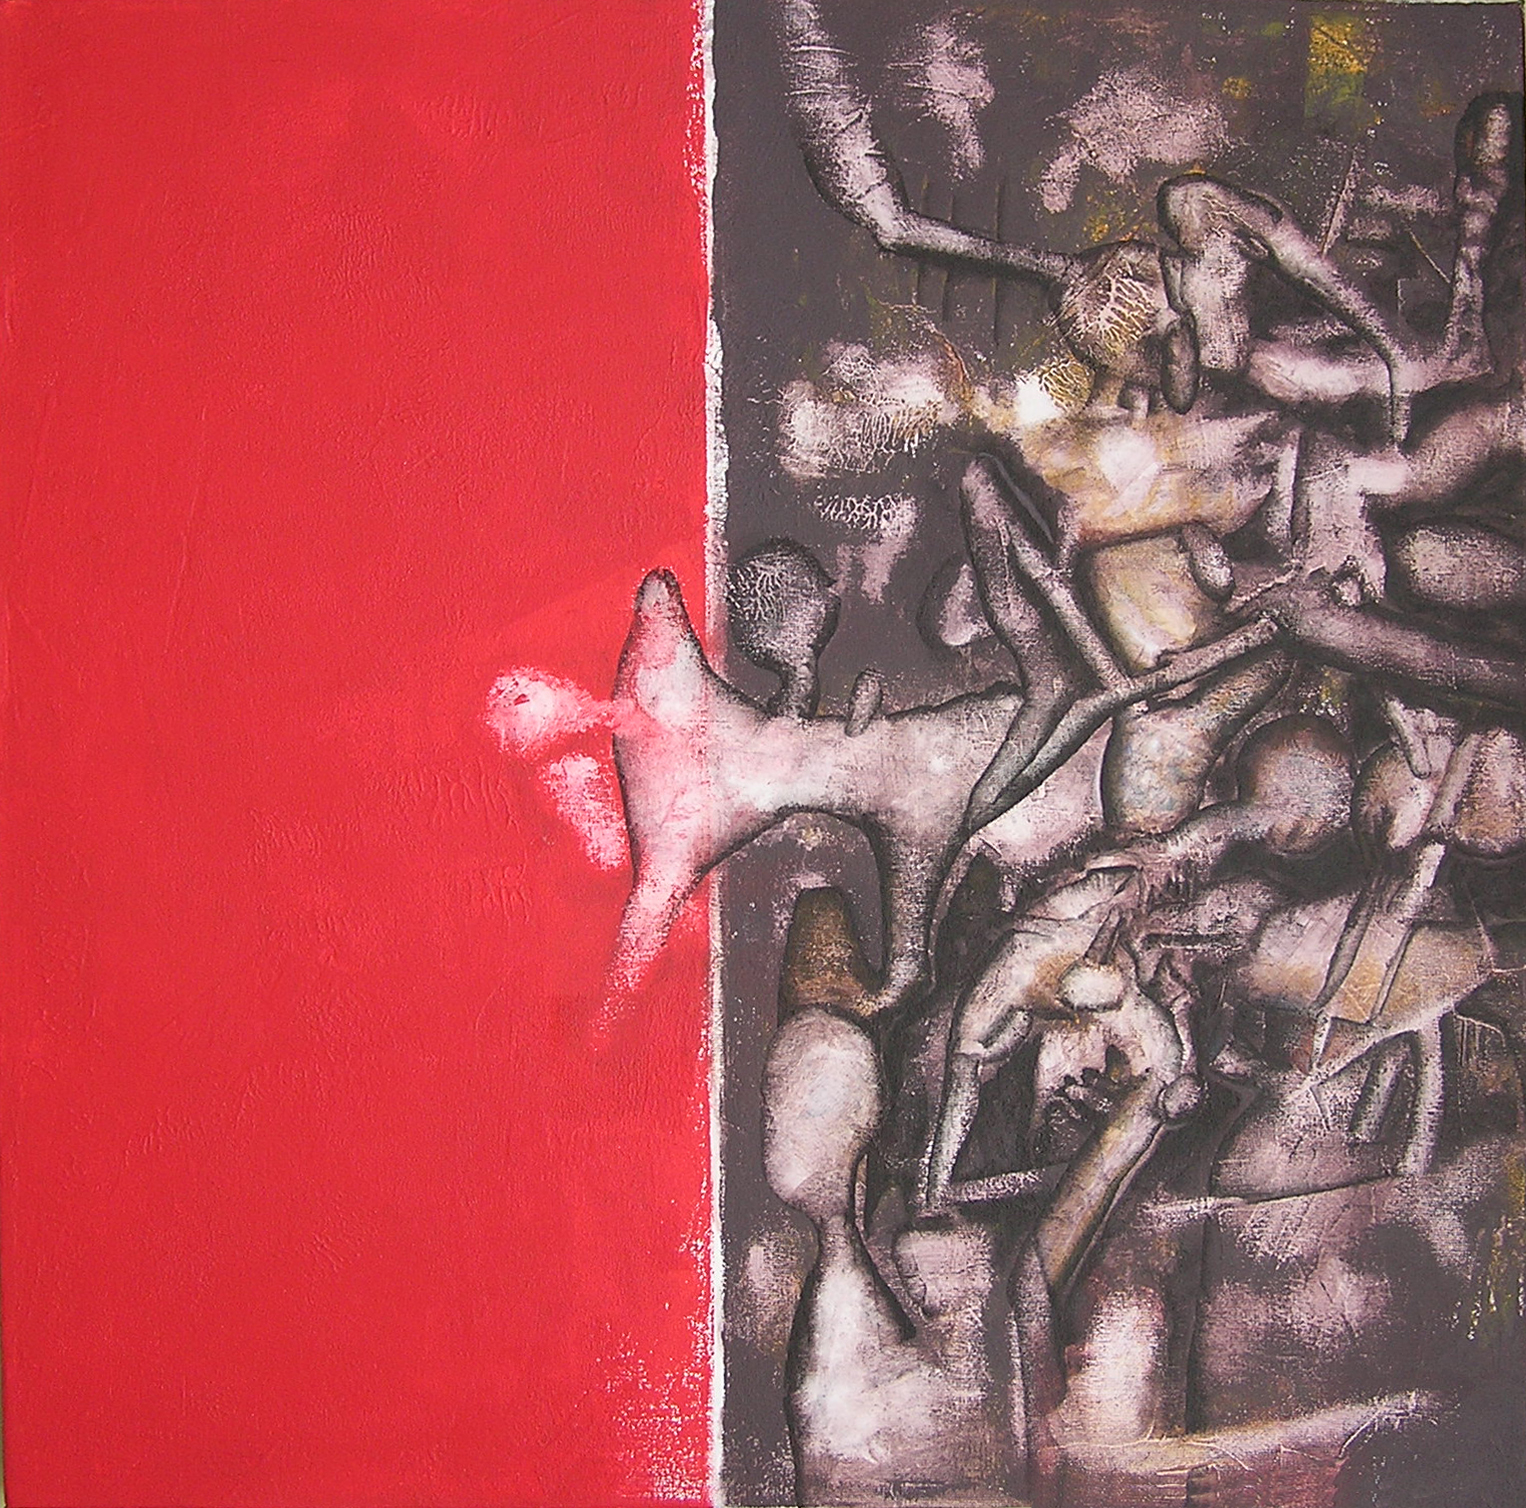 Red Scenery, 50x50cm, 2014-09-28